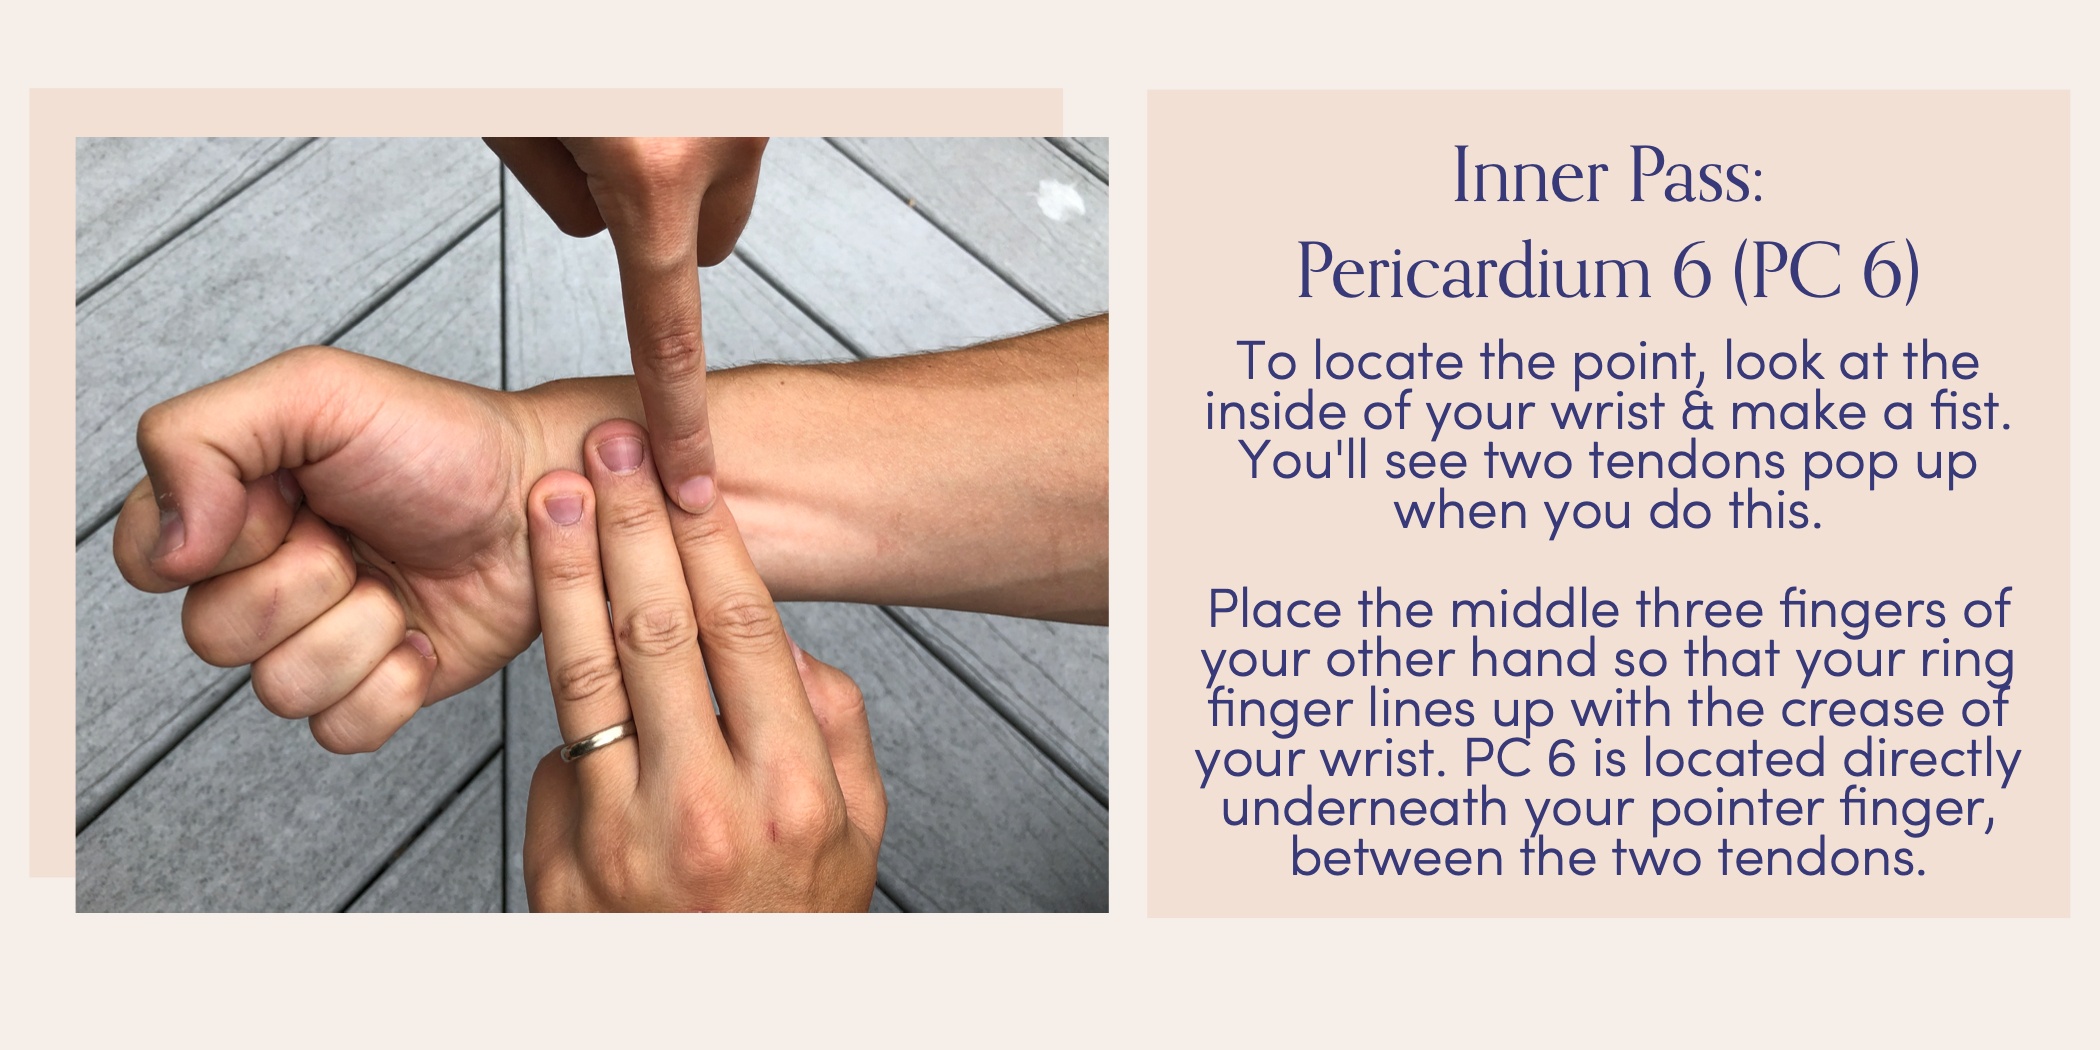 Demonstration of the acupressure point called inner pass